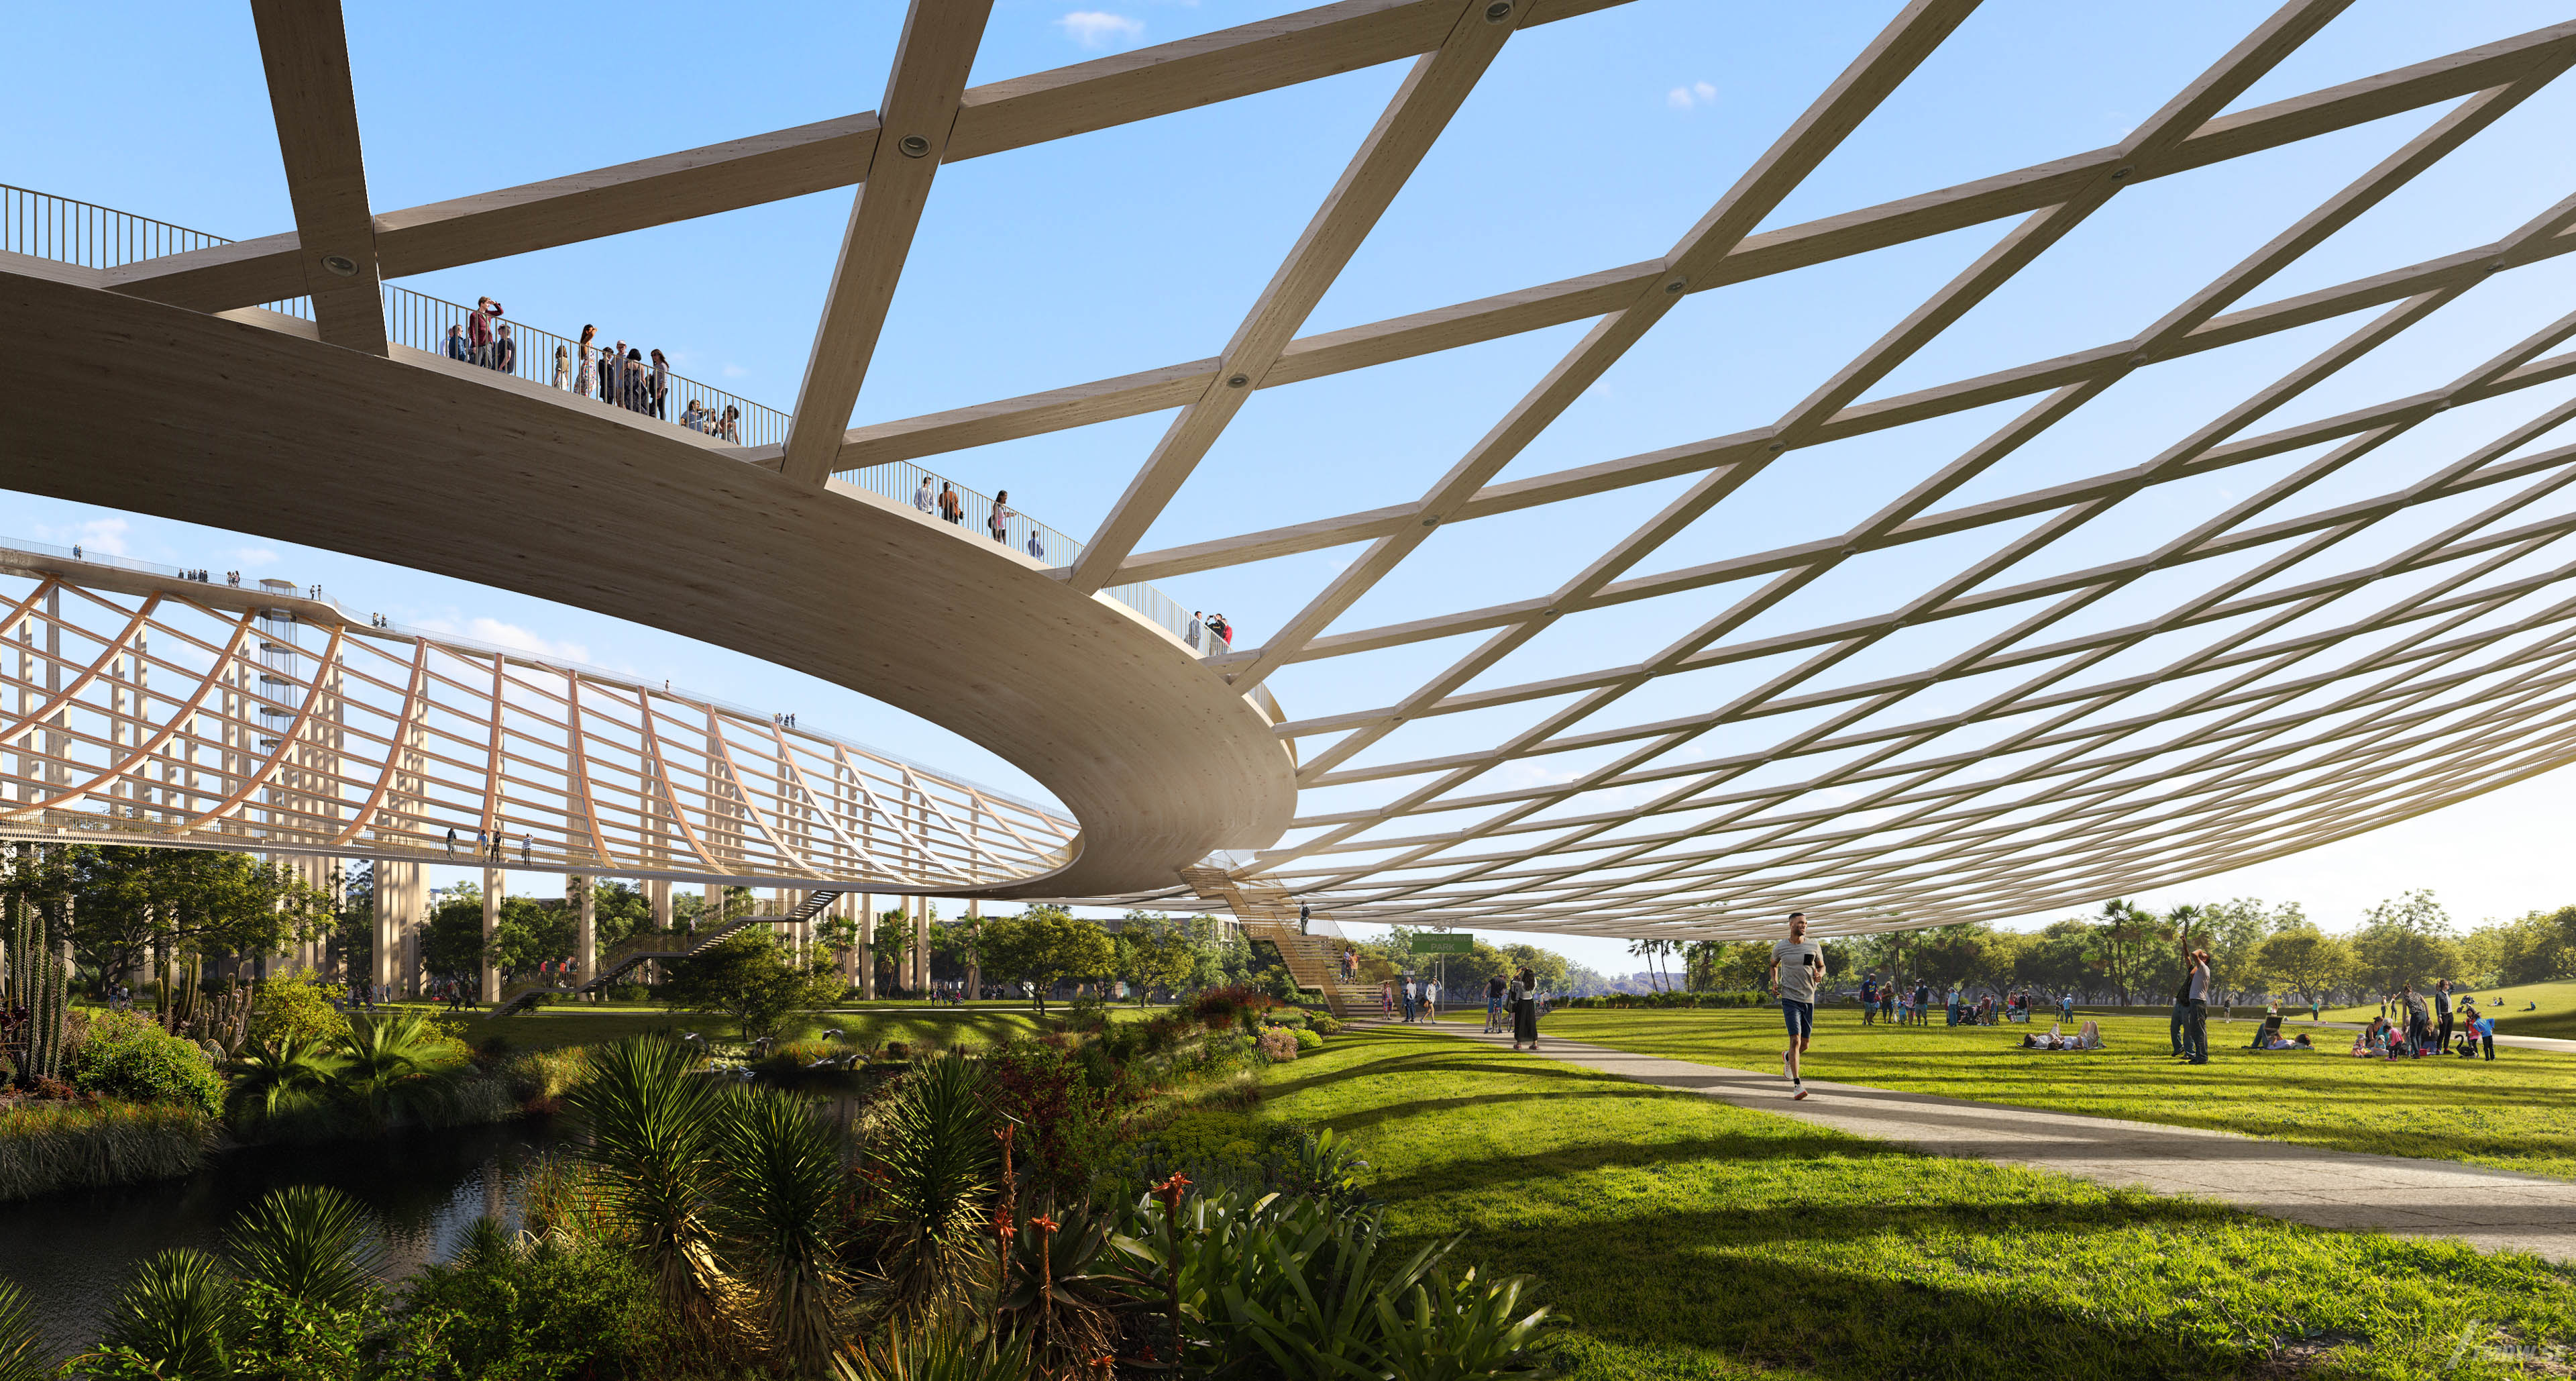 Architectural visualization of Sky Light Park for White, park with big wooden structure that people are walking on